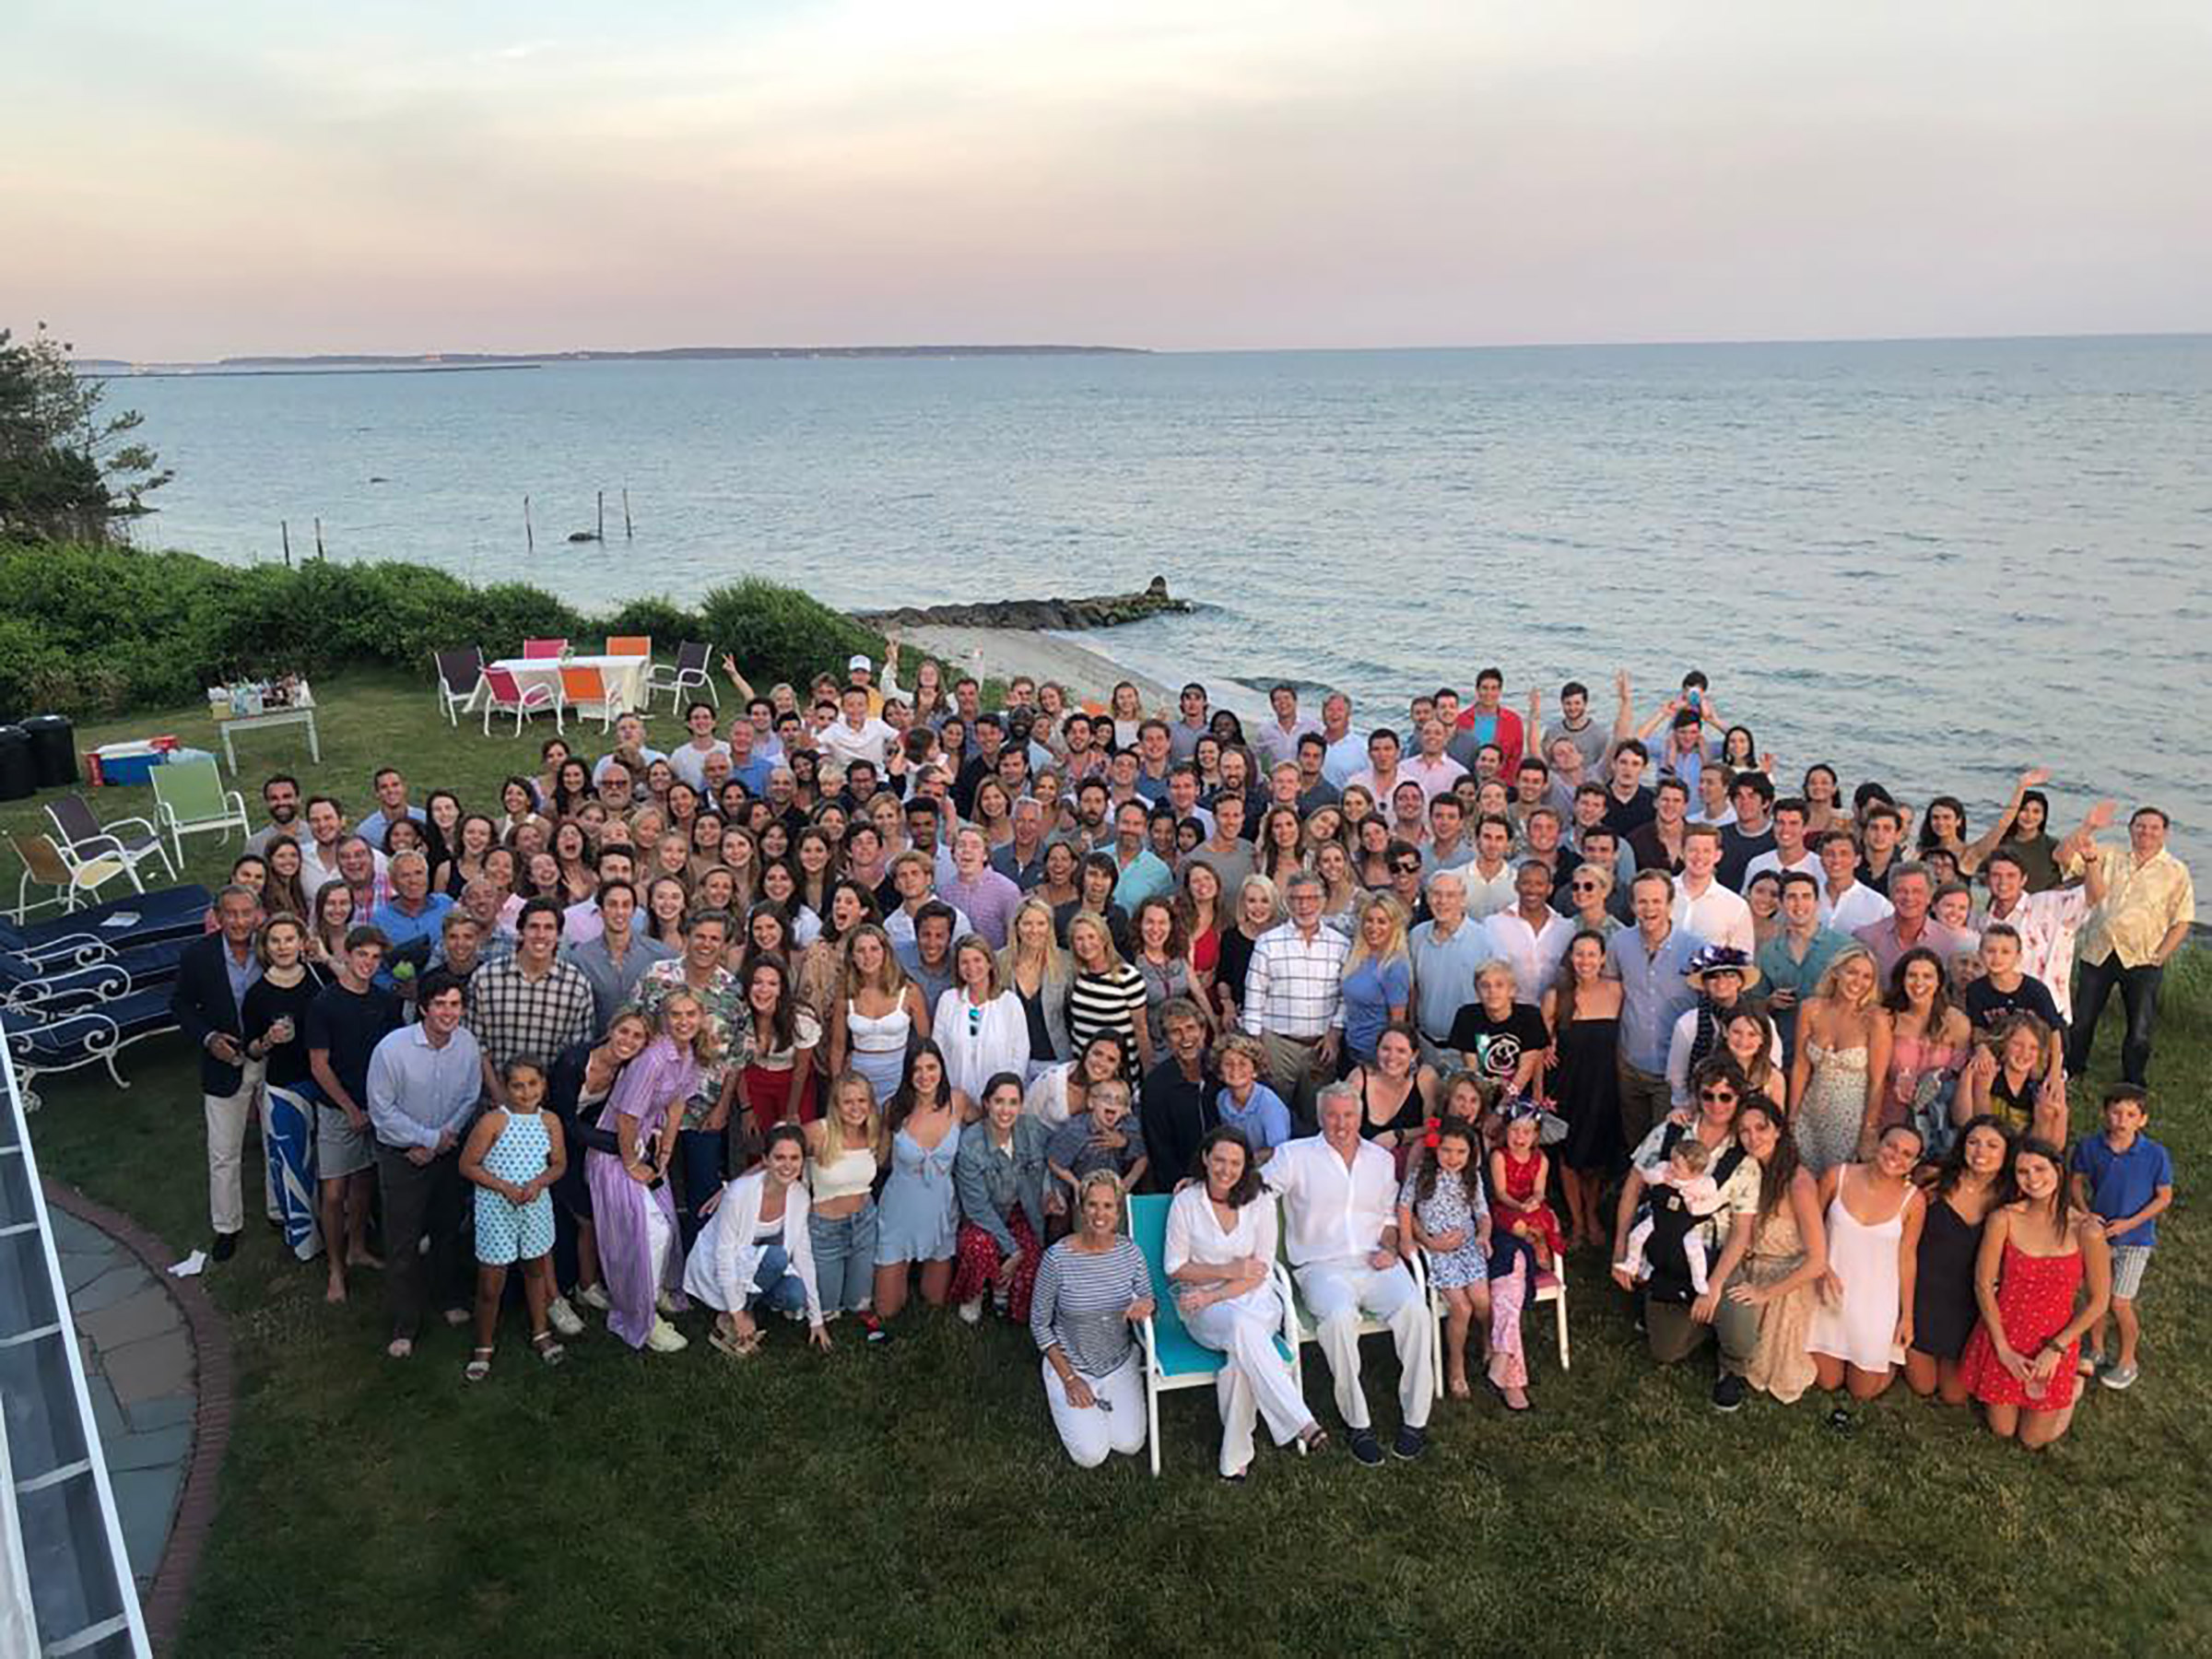 Chris Pratt Joins in Giant Kennedy Family Photo — and Becomes a Perfect Instagram Husband